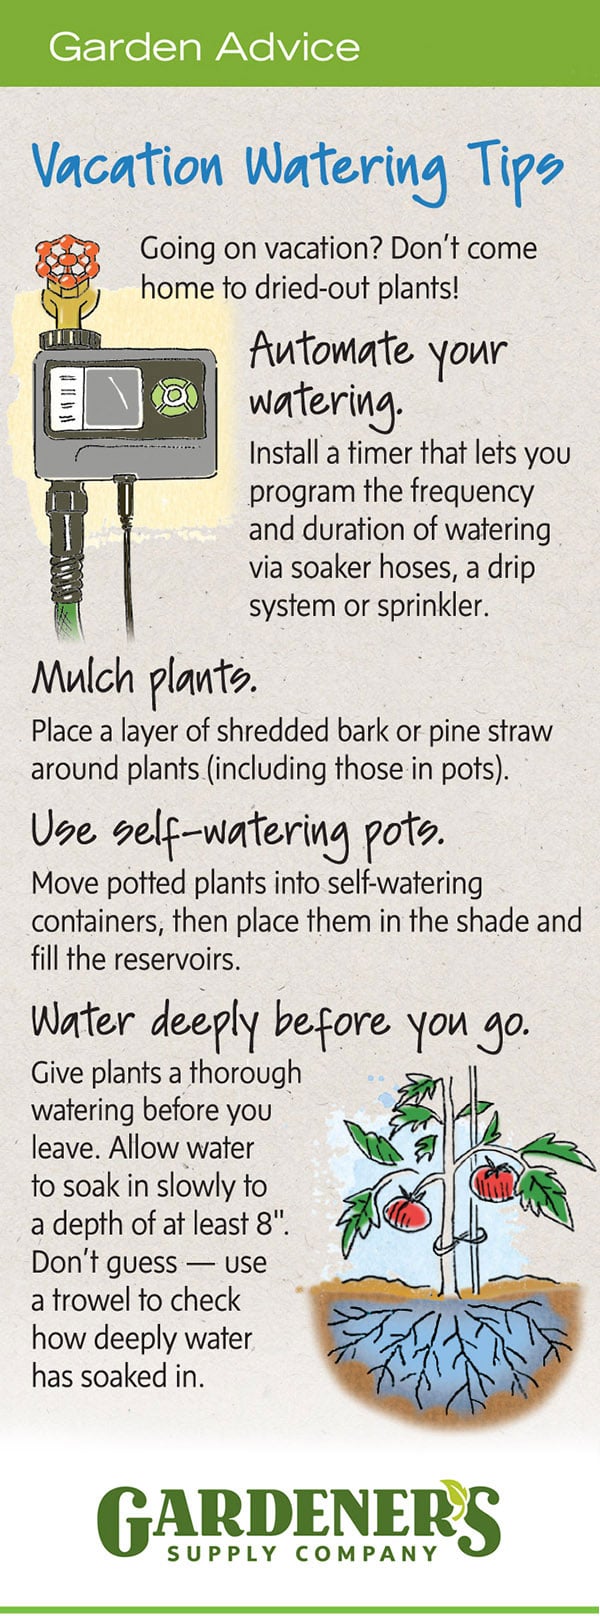 Tips for watering while away